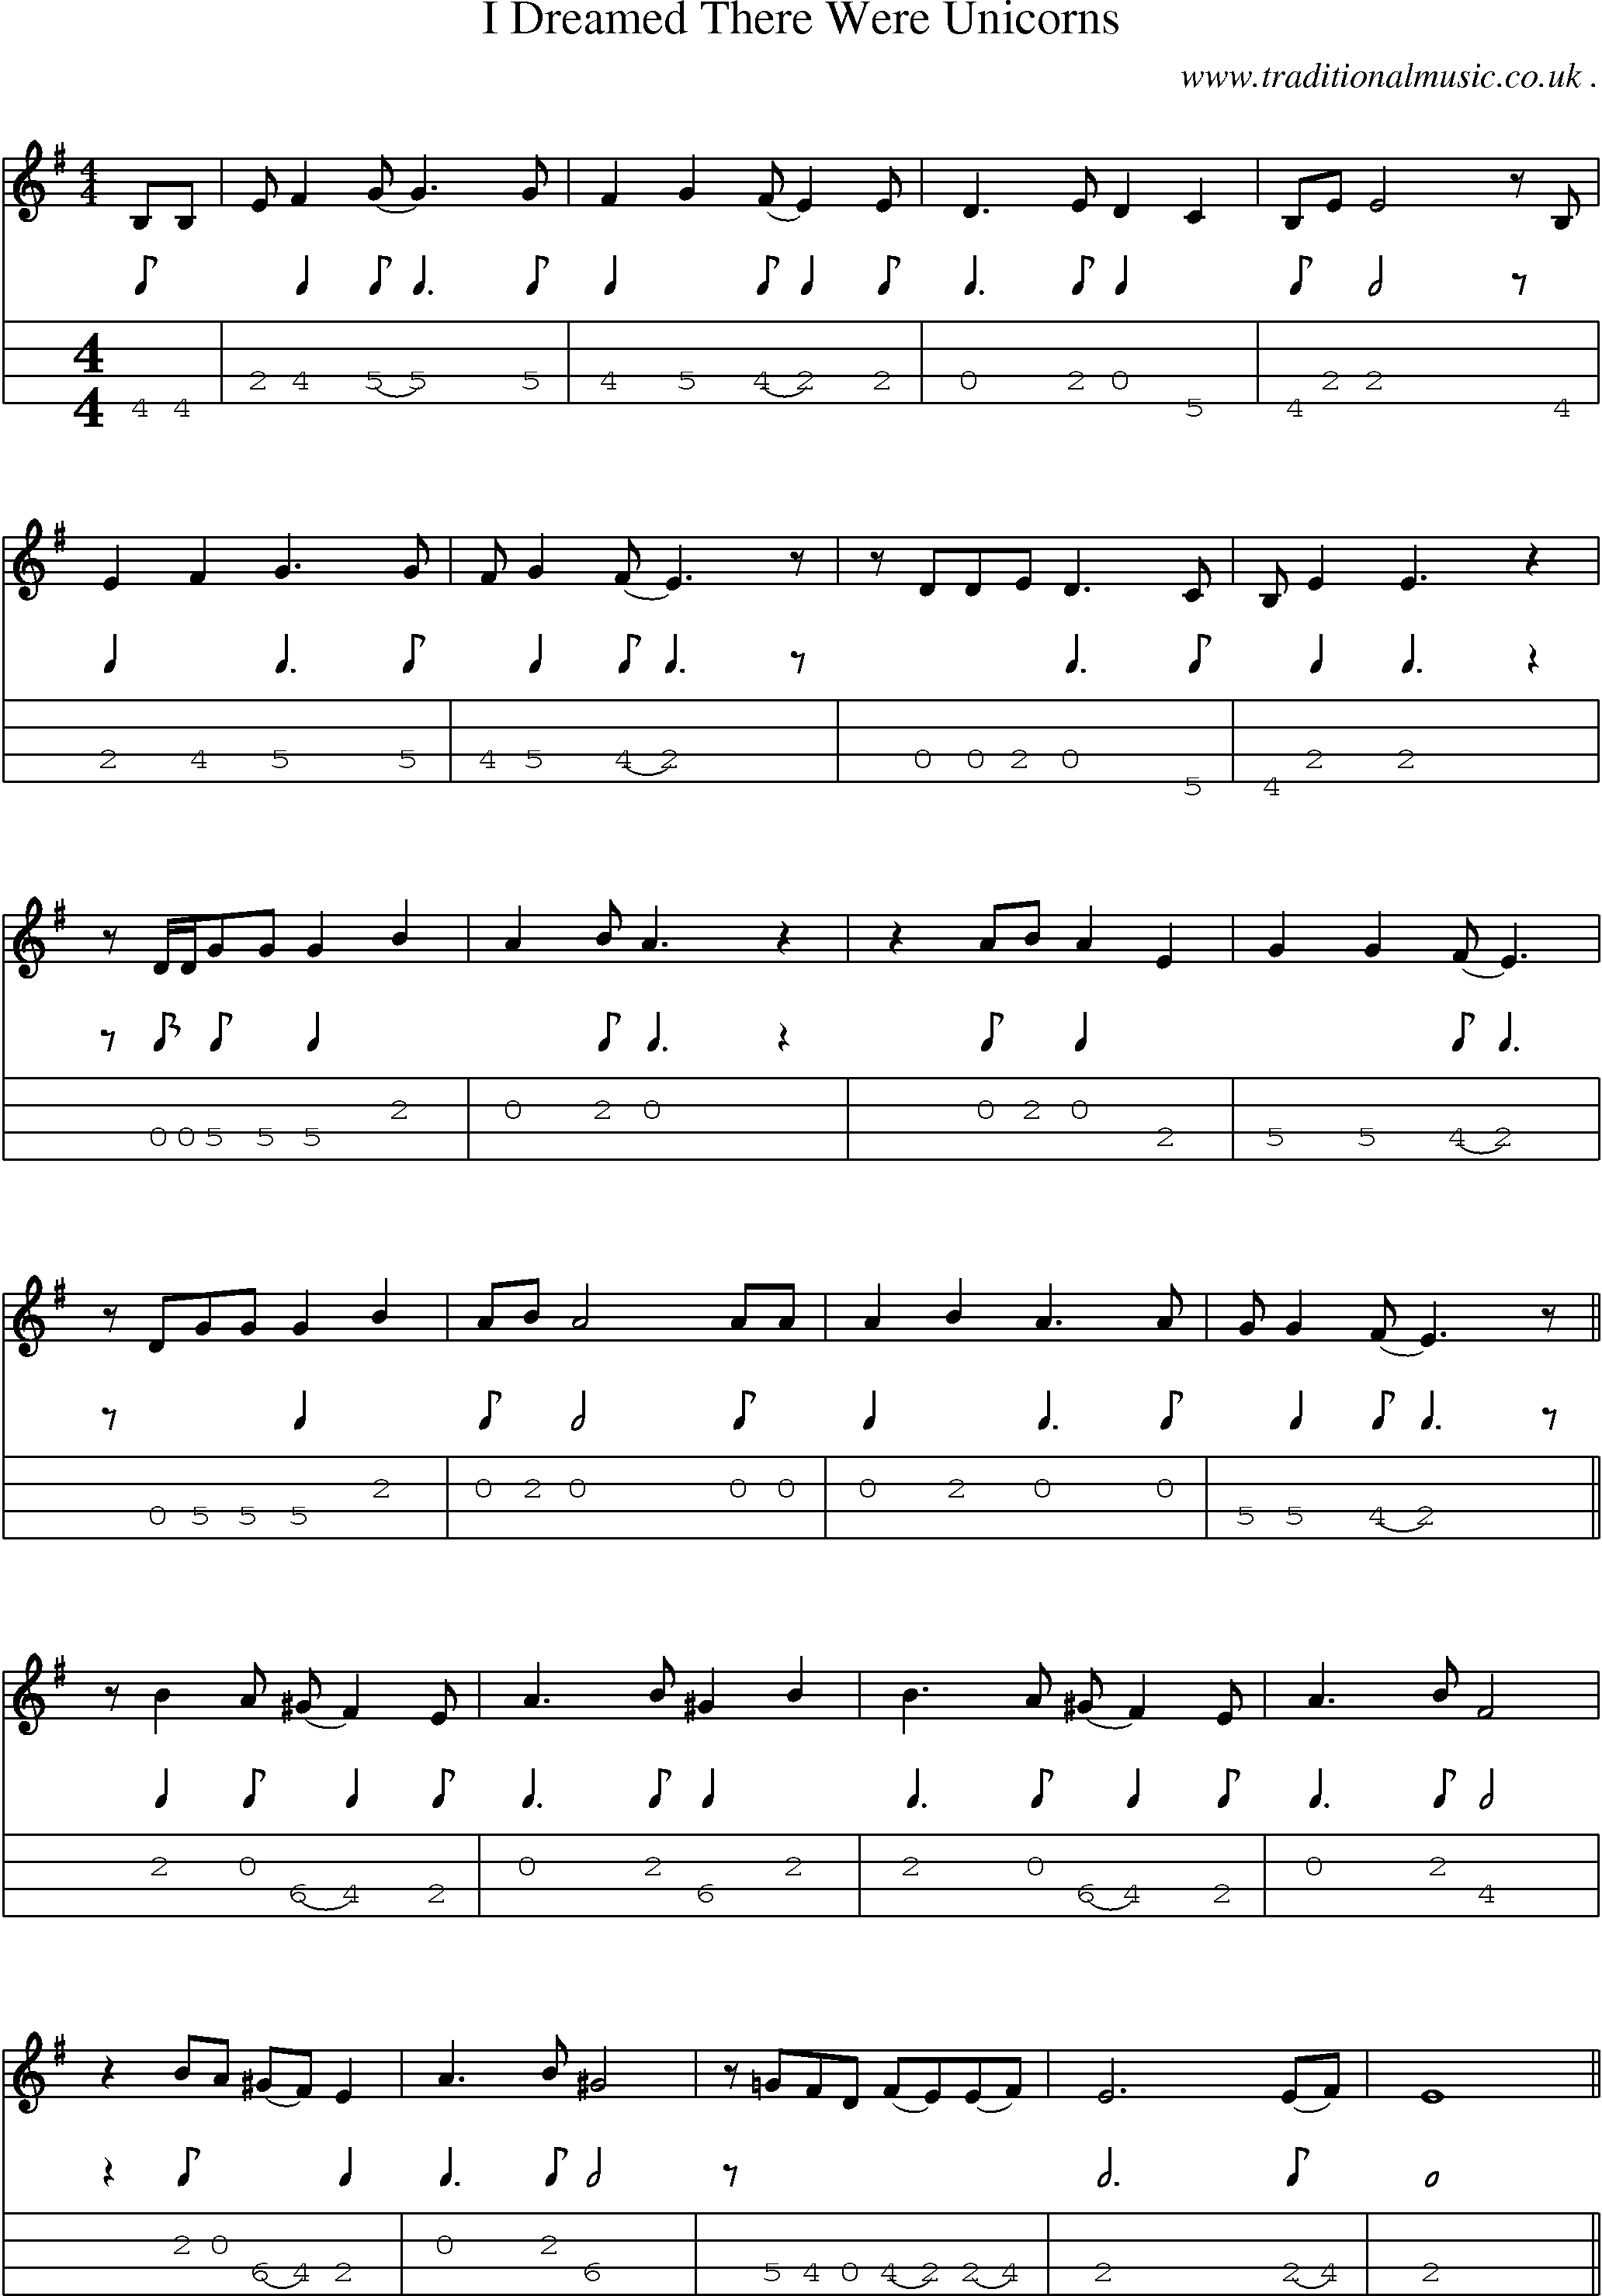 Sheet-Music and Mandolin Tabs for I Dreamed There Were Unicorns